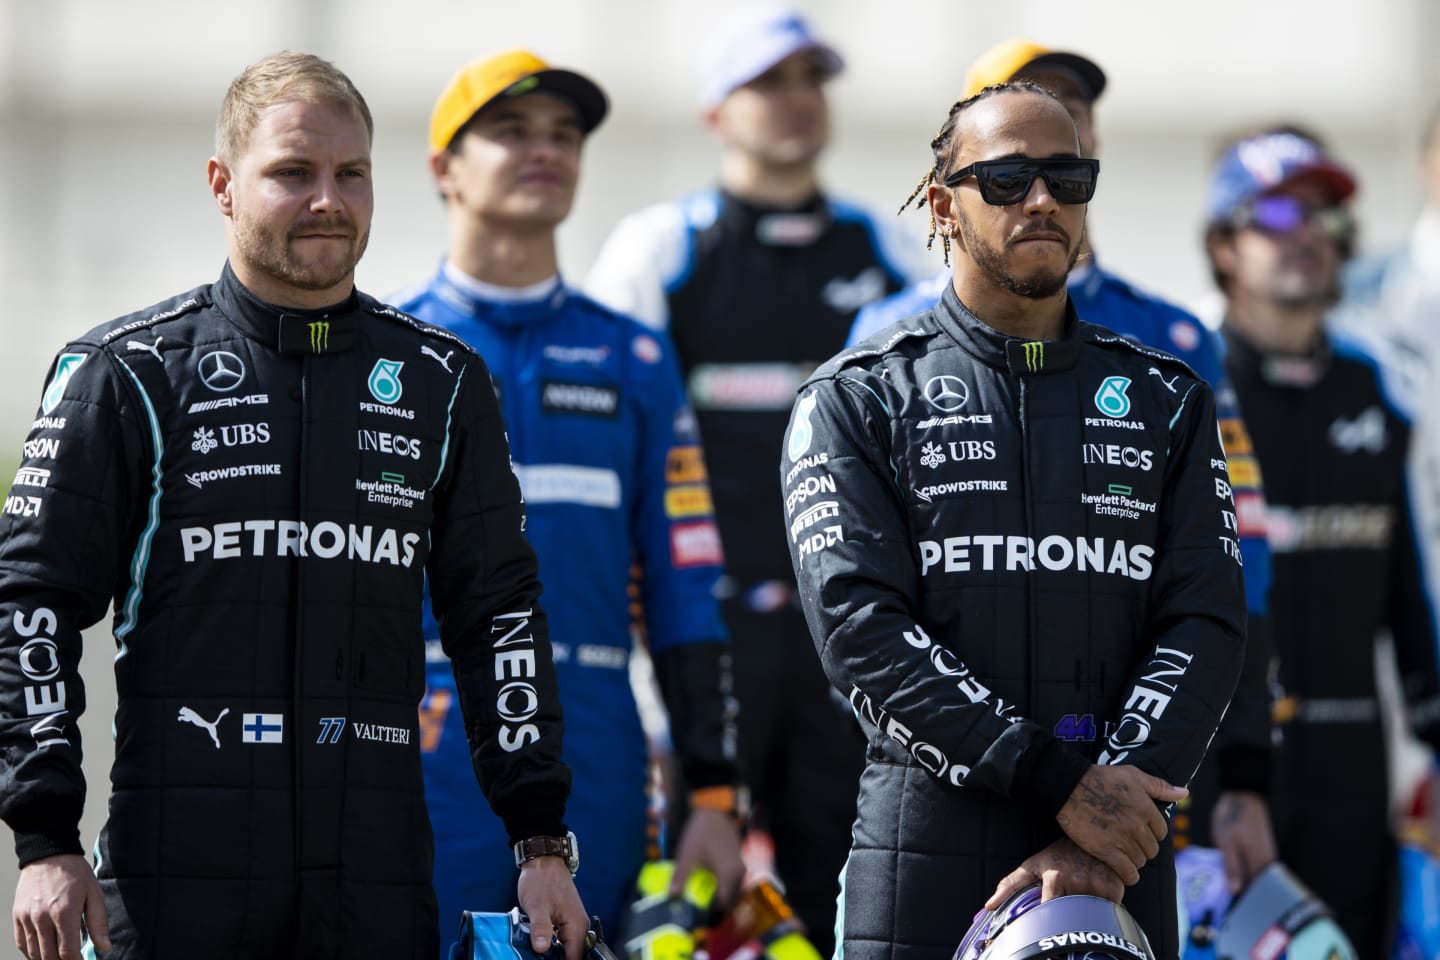 Lewis Hamilton dons his shades for the class of '21 photo. Team mate Valtteri Bottas was hampered by a gearbox issue in the morning